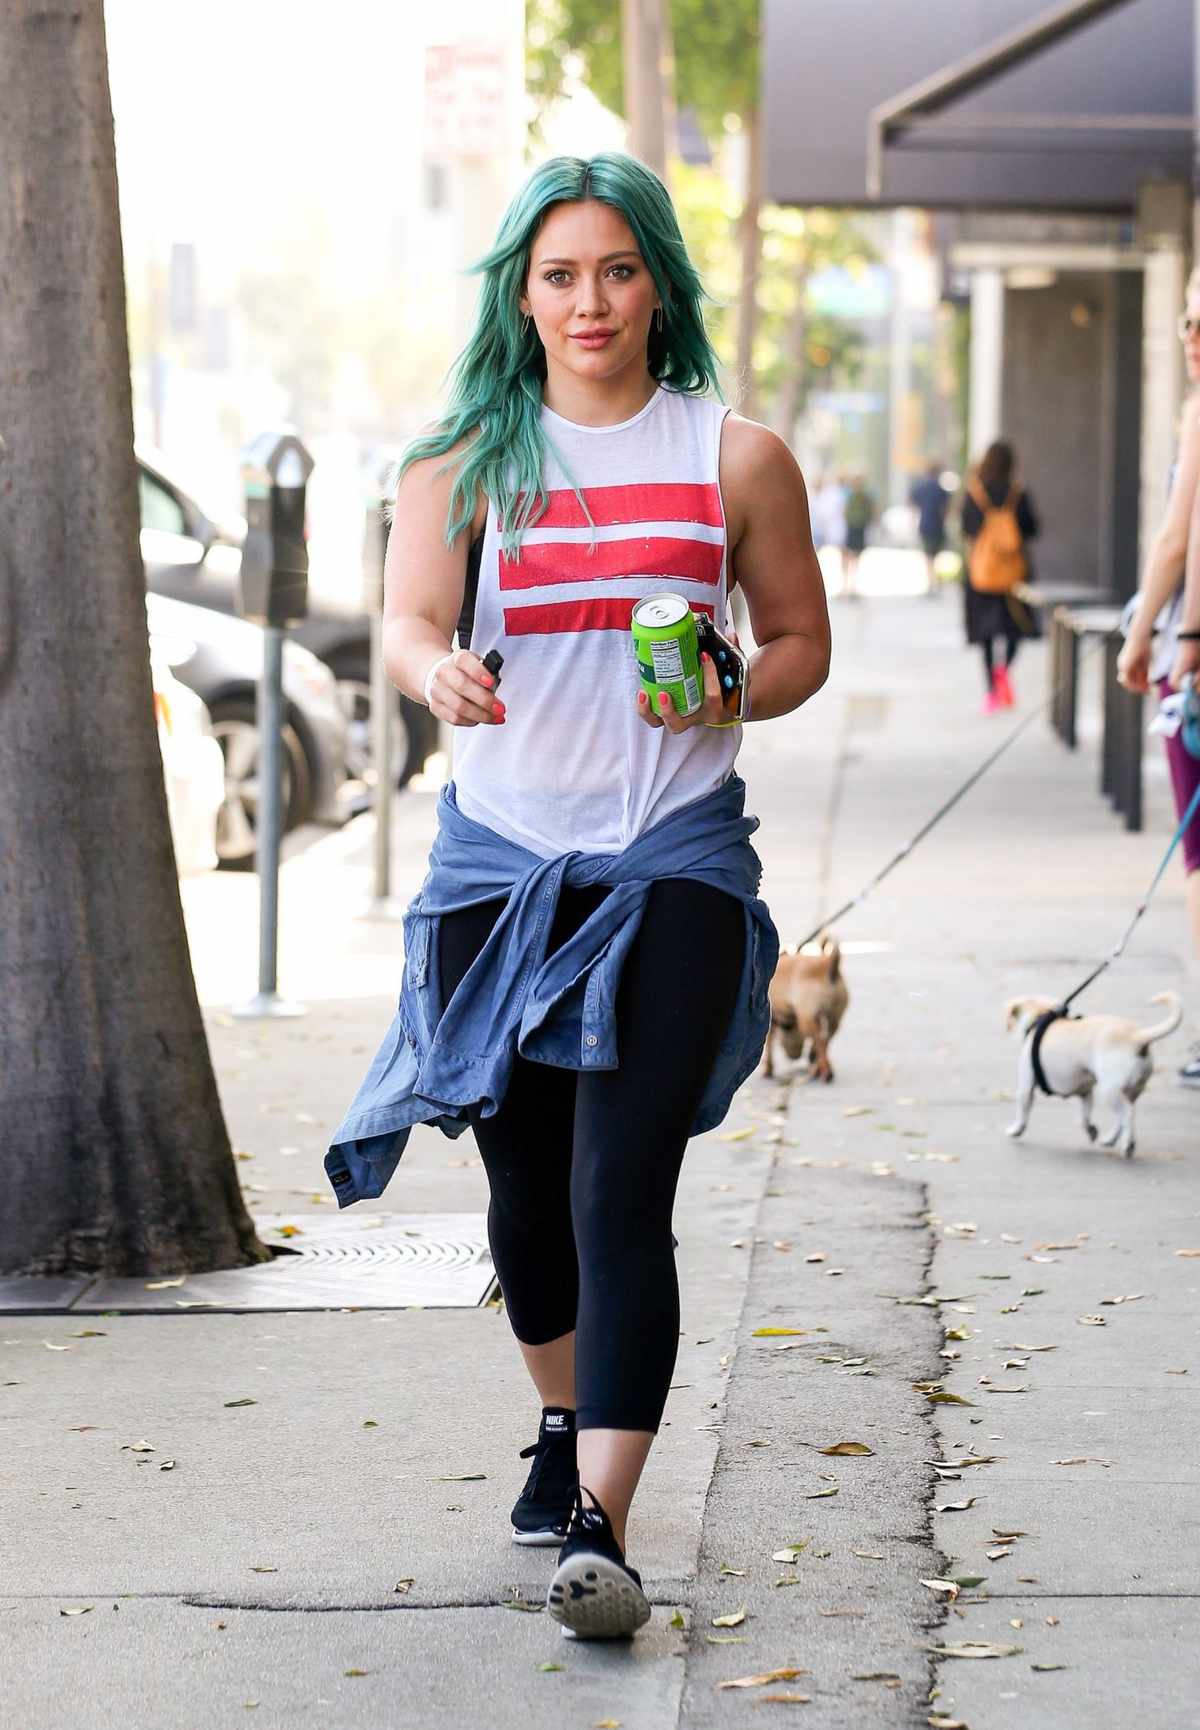 Hilary Duff is seen with a new aqua green hairdo on March 20, 2015 in Los Angeles, California.